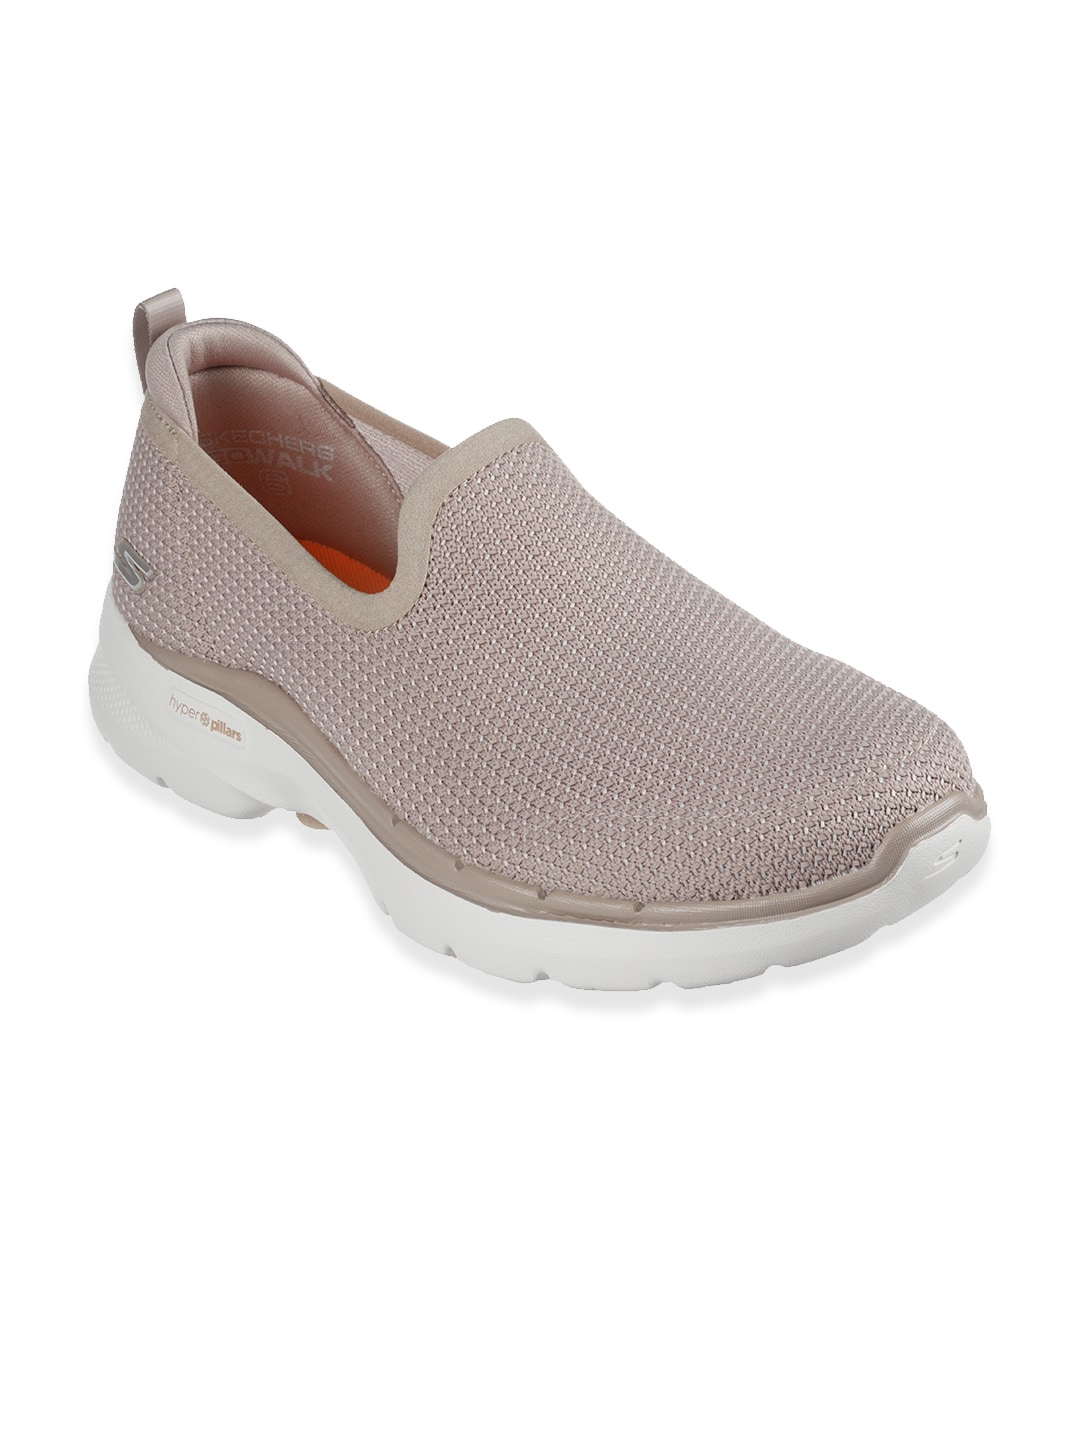 Skechers Women Nude-Coloured Mesh Walking Non-Marking Shoes Price in India